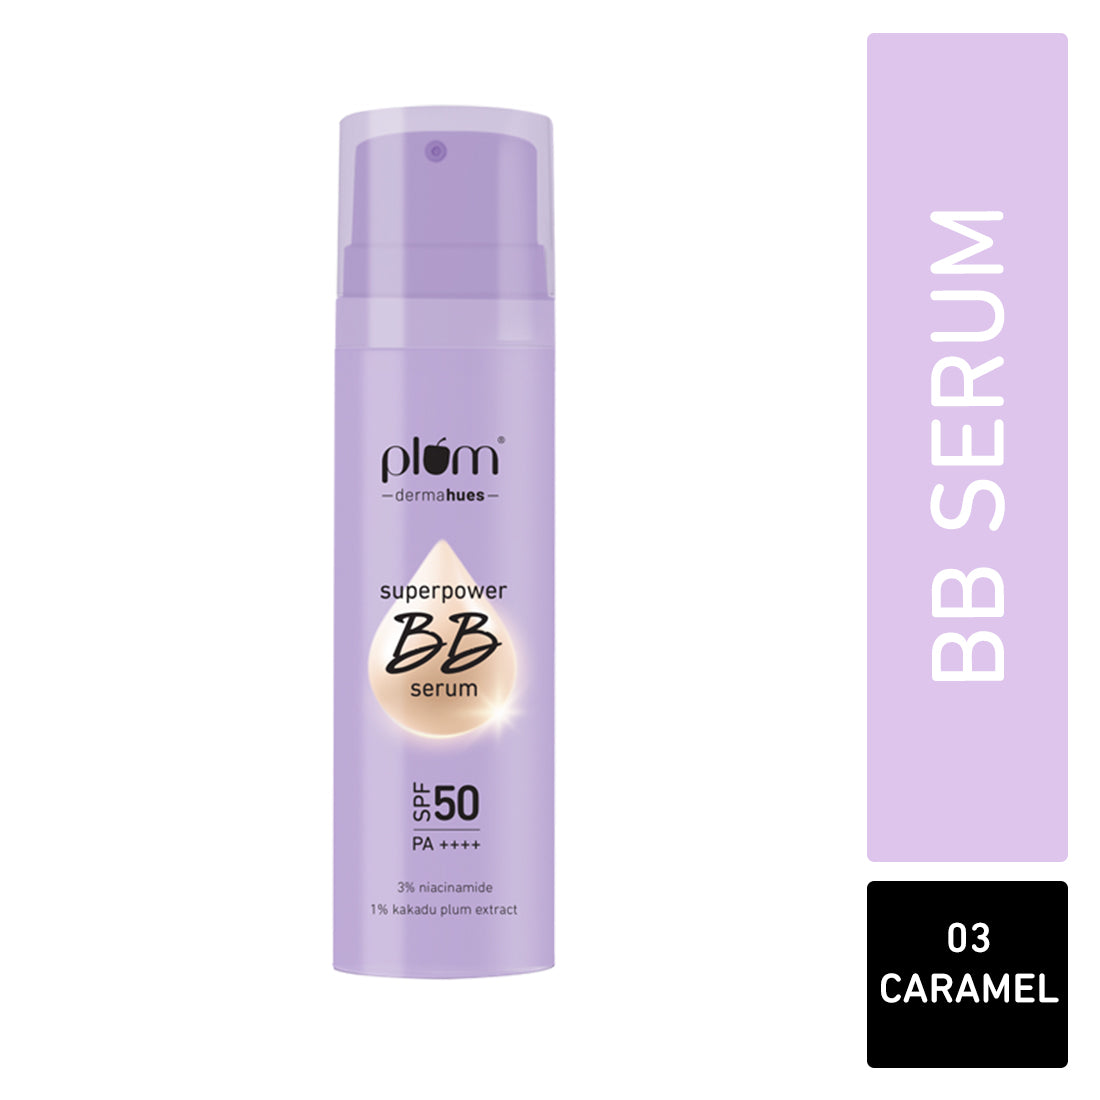 

Superpower BB Serum with SPF 50 PA ++++ | Natural Everyday Base | Evens Out Skin Tone | Buildable Coverage | With 3% Niacinamide | 100% Vegan & Cruelty Free, 03 Caramel